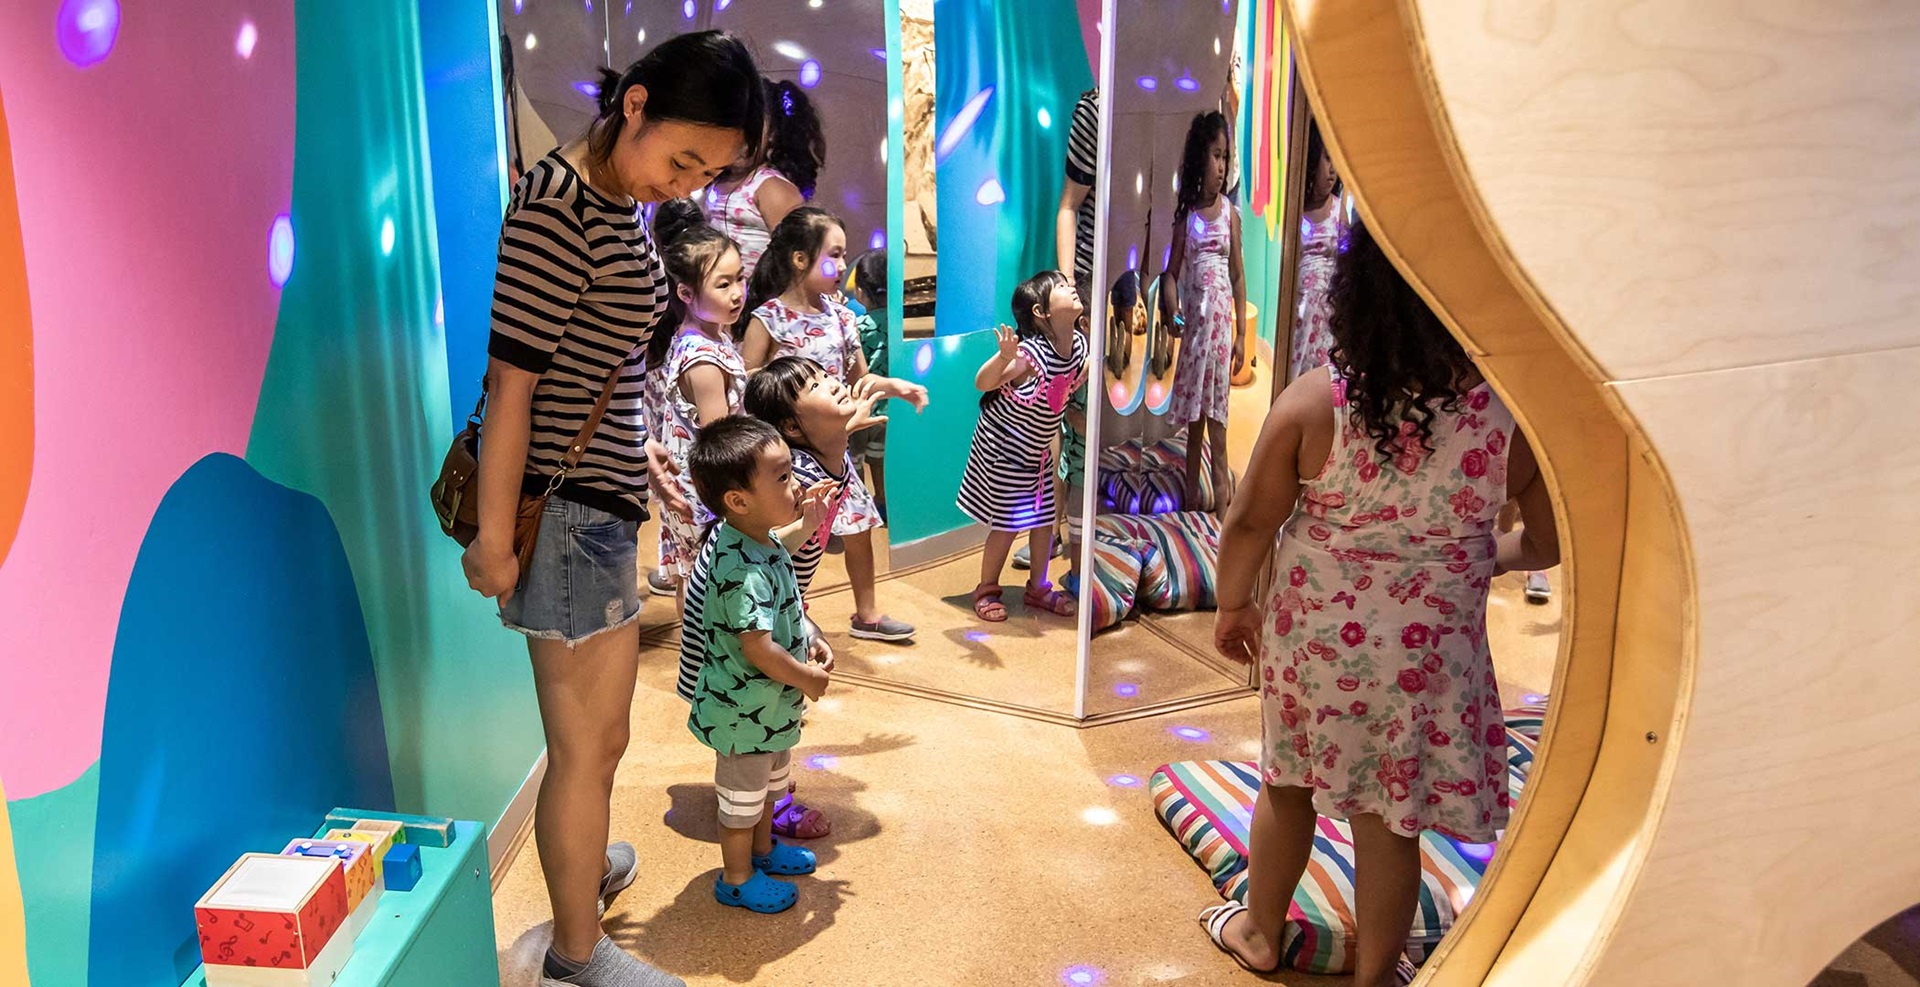 A group of young children playing the museums Under 5 play space